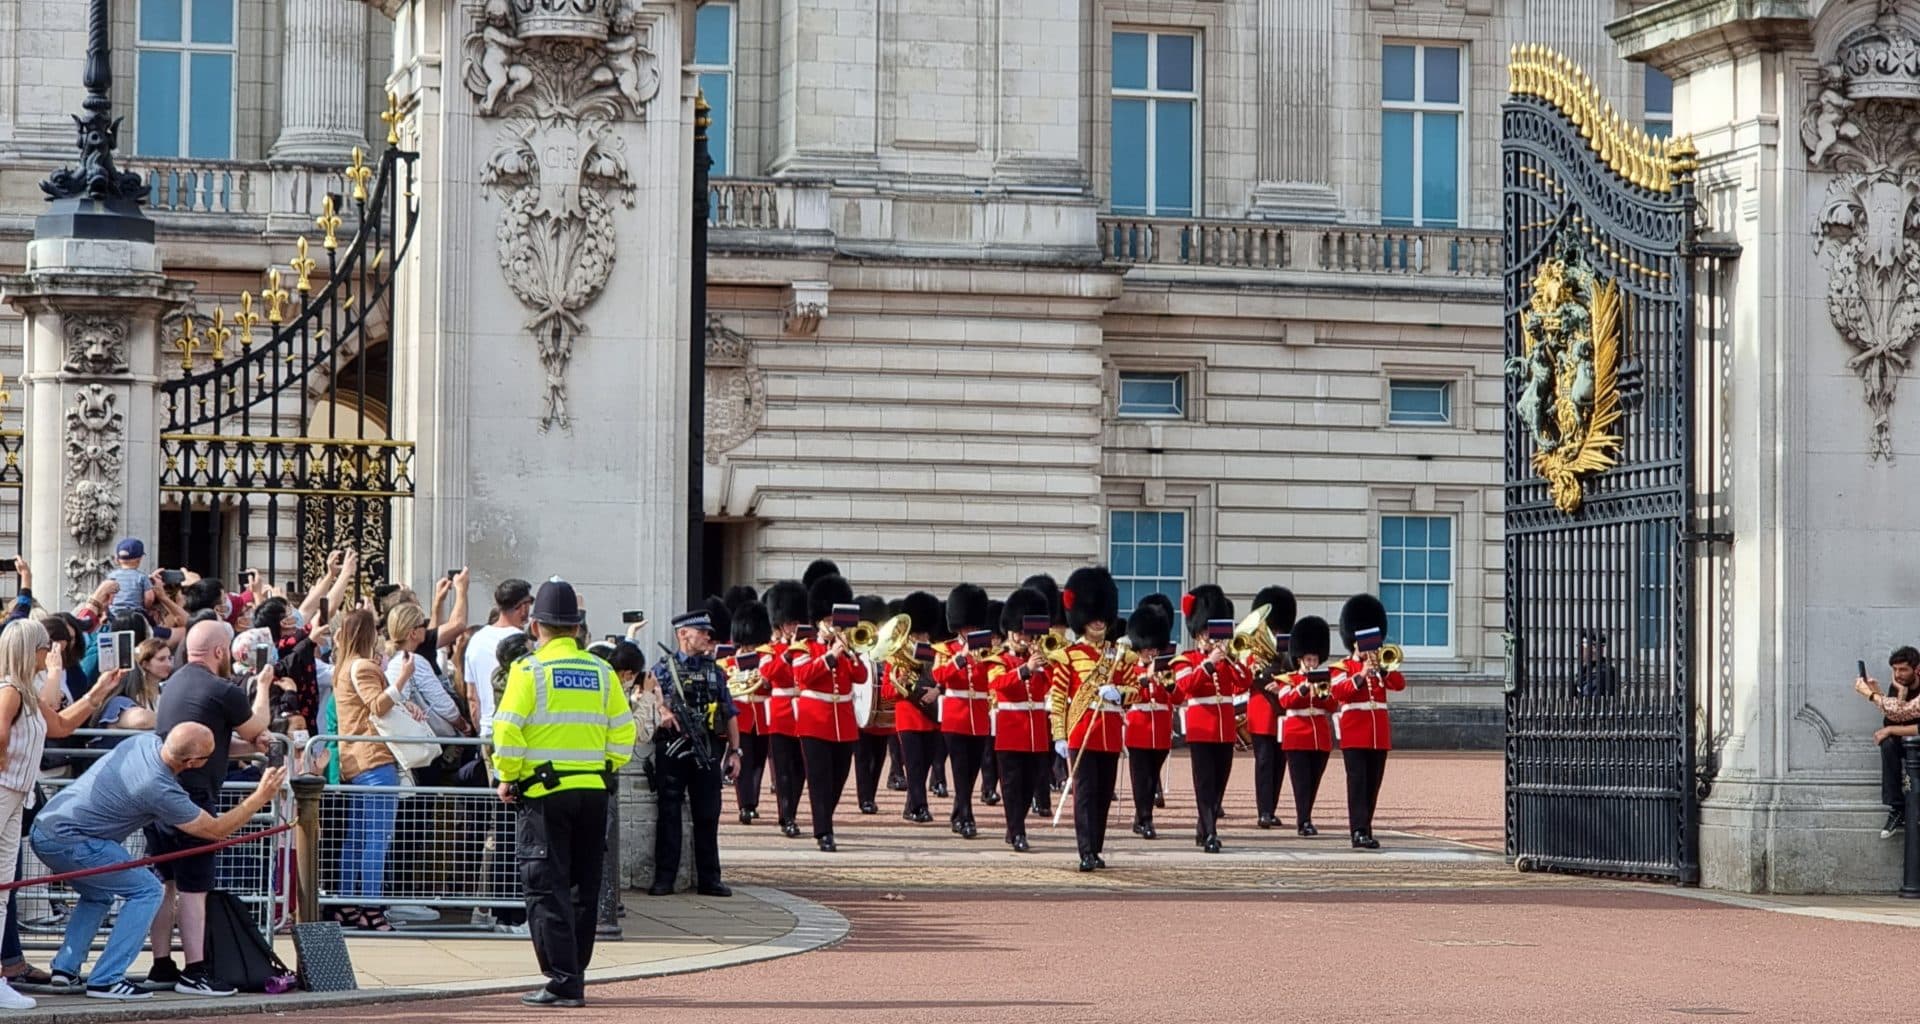 changing of the guard ceremony, buckingham palace, london